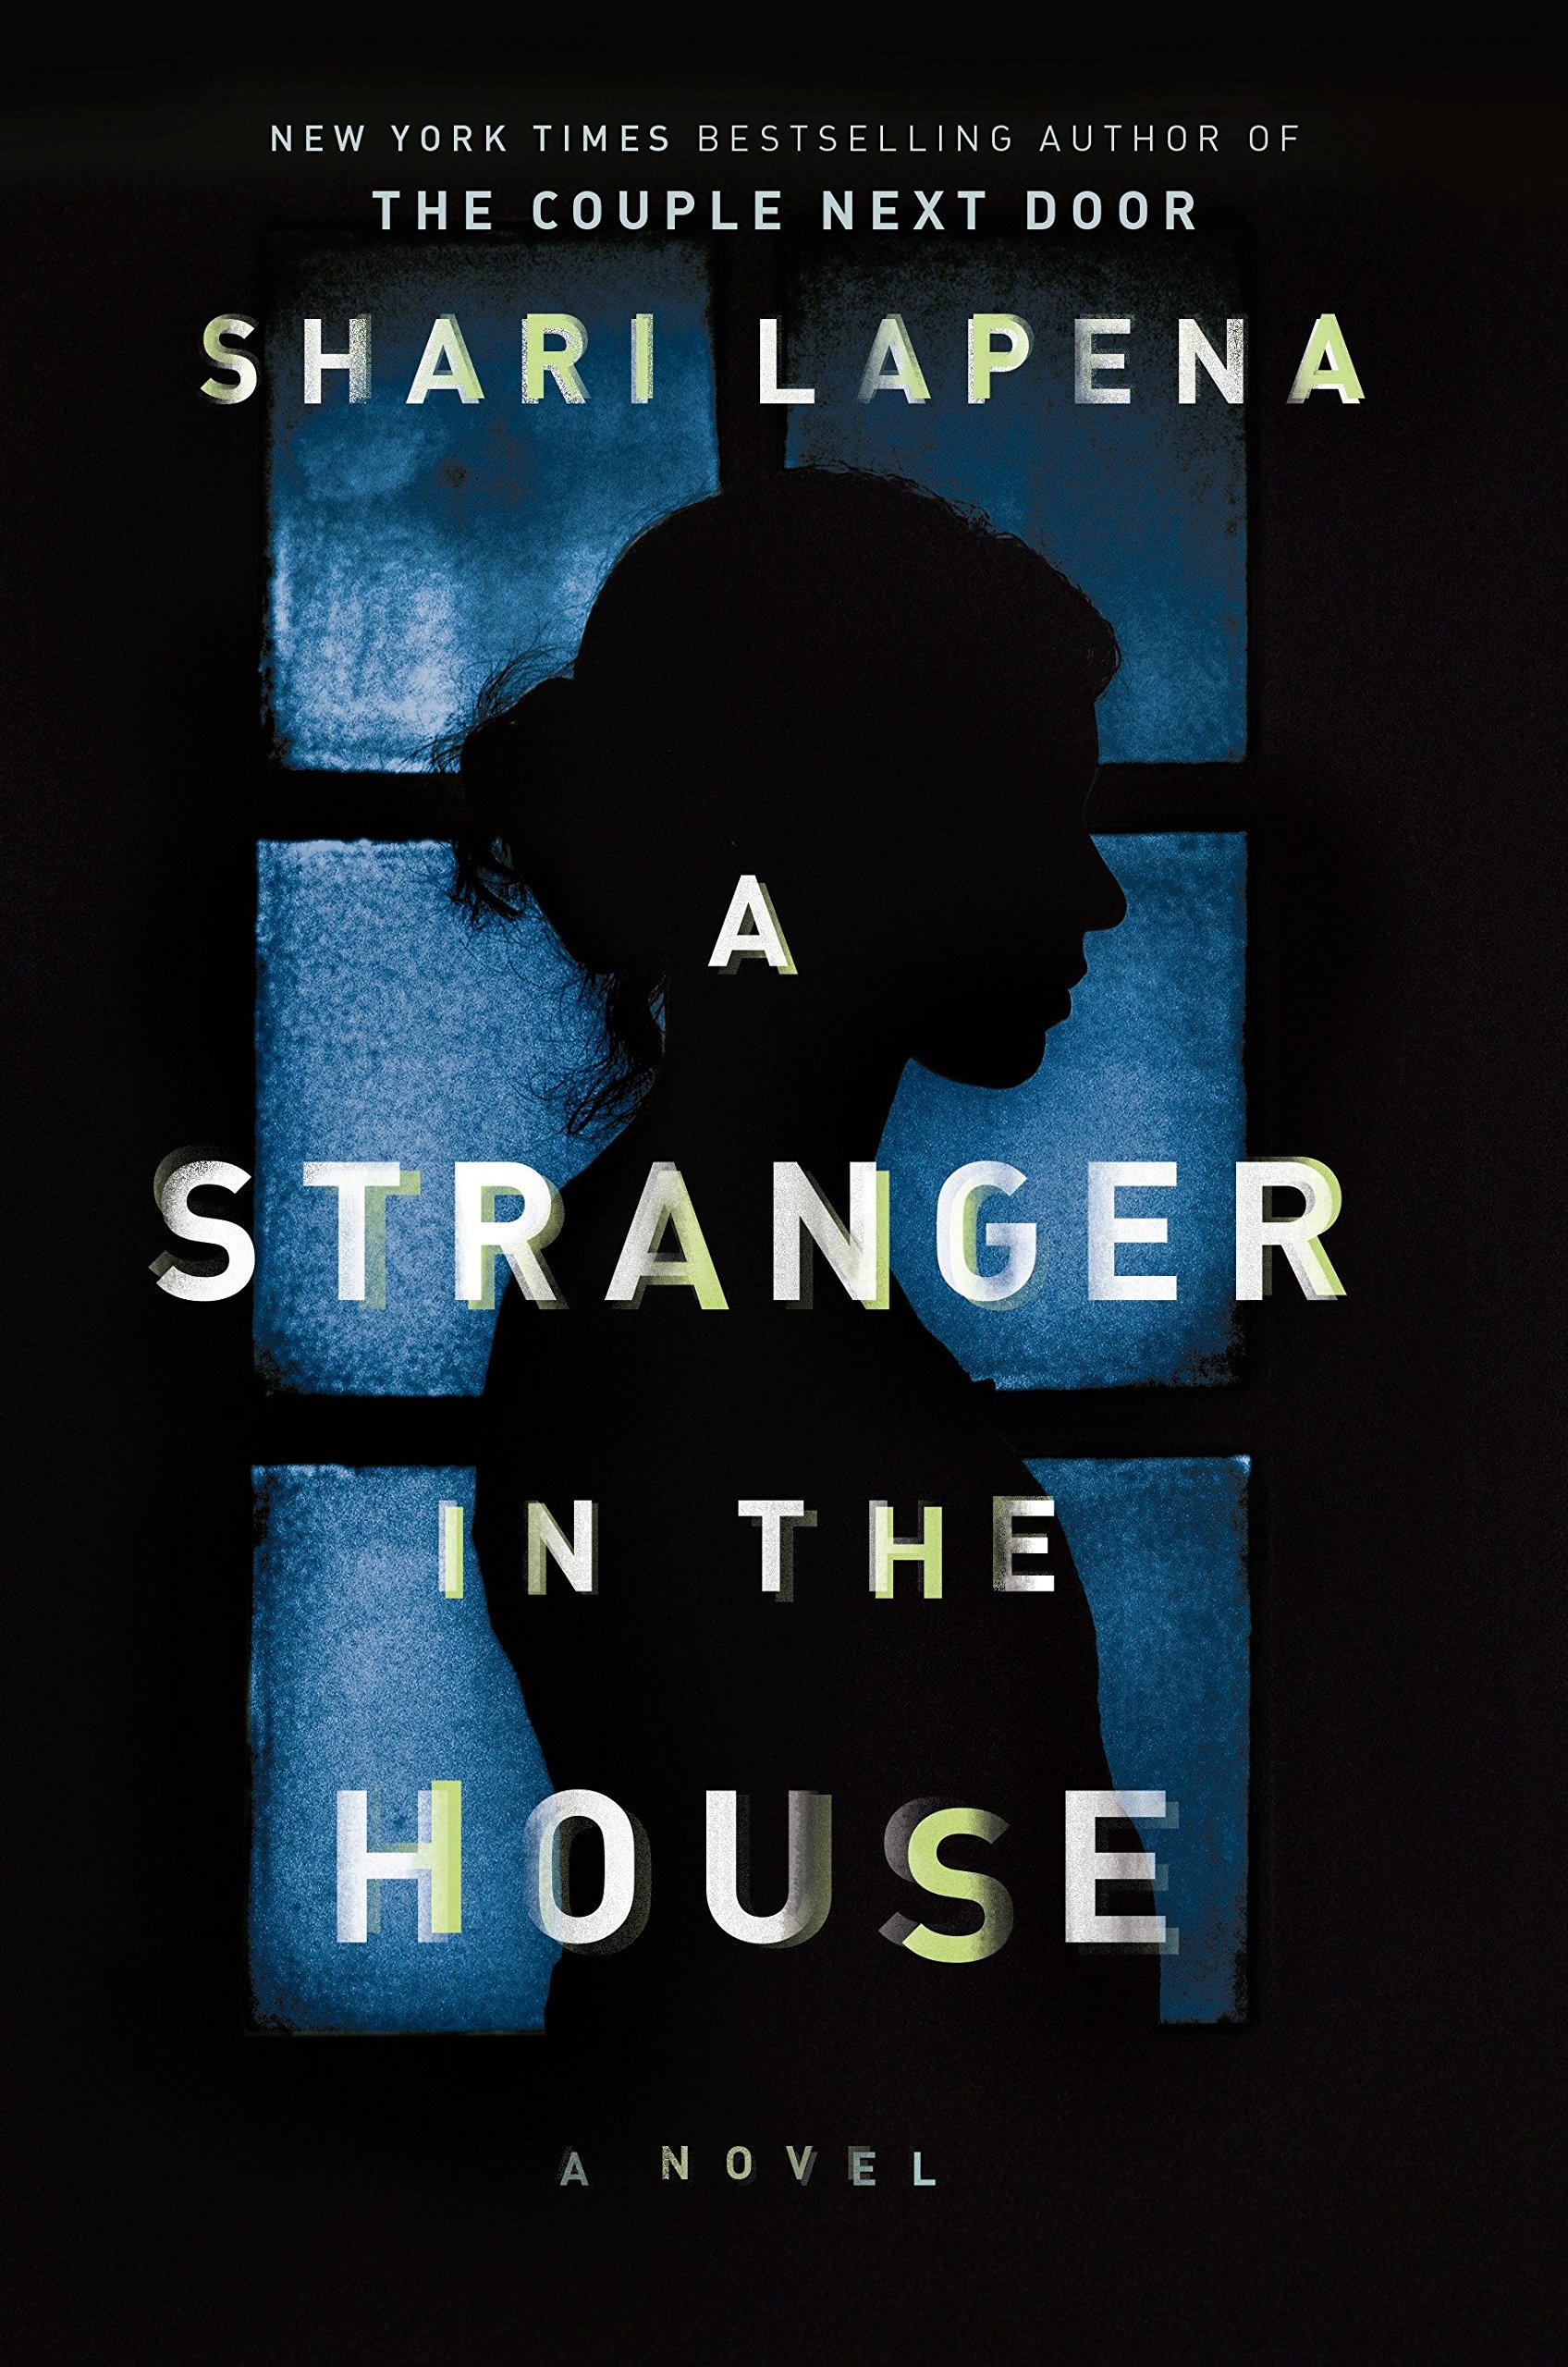 Image for "A Stranger in the House"